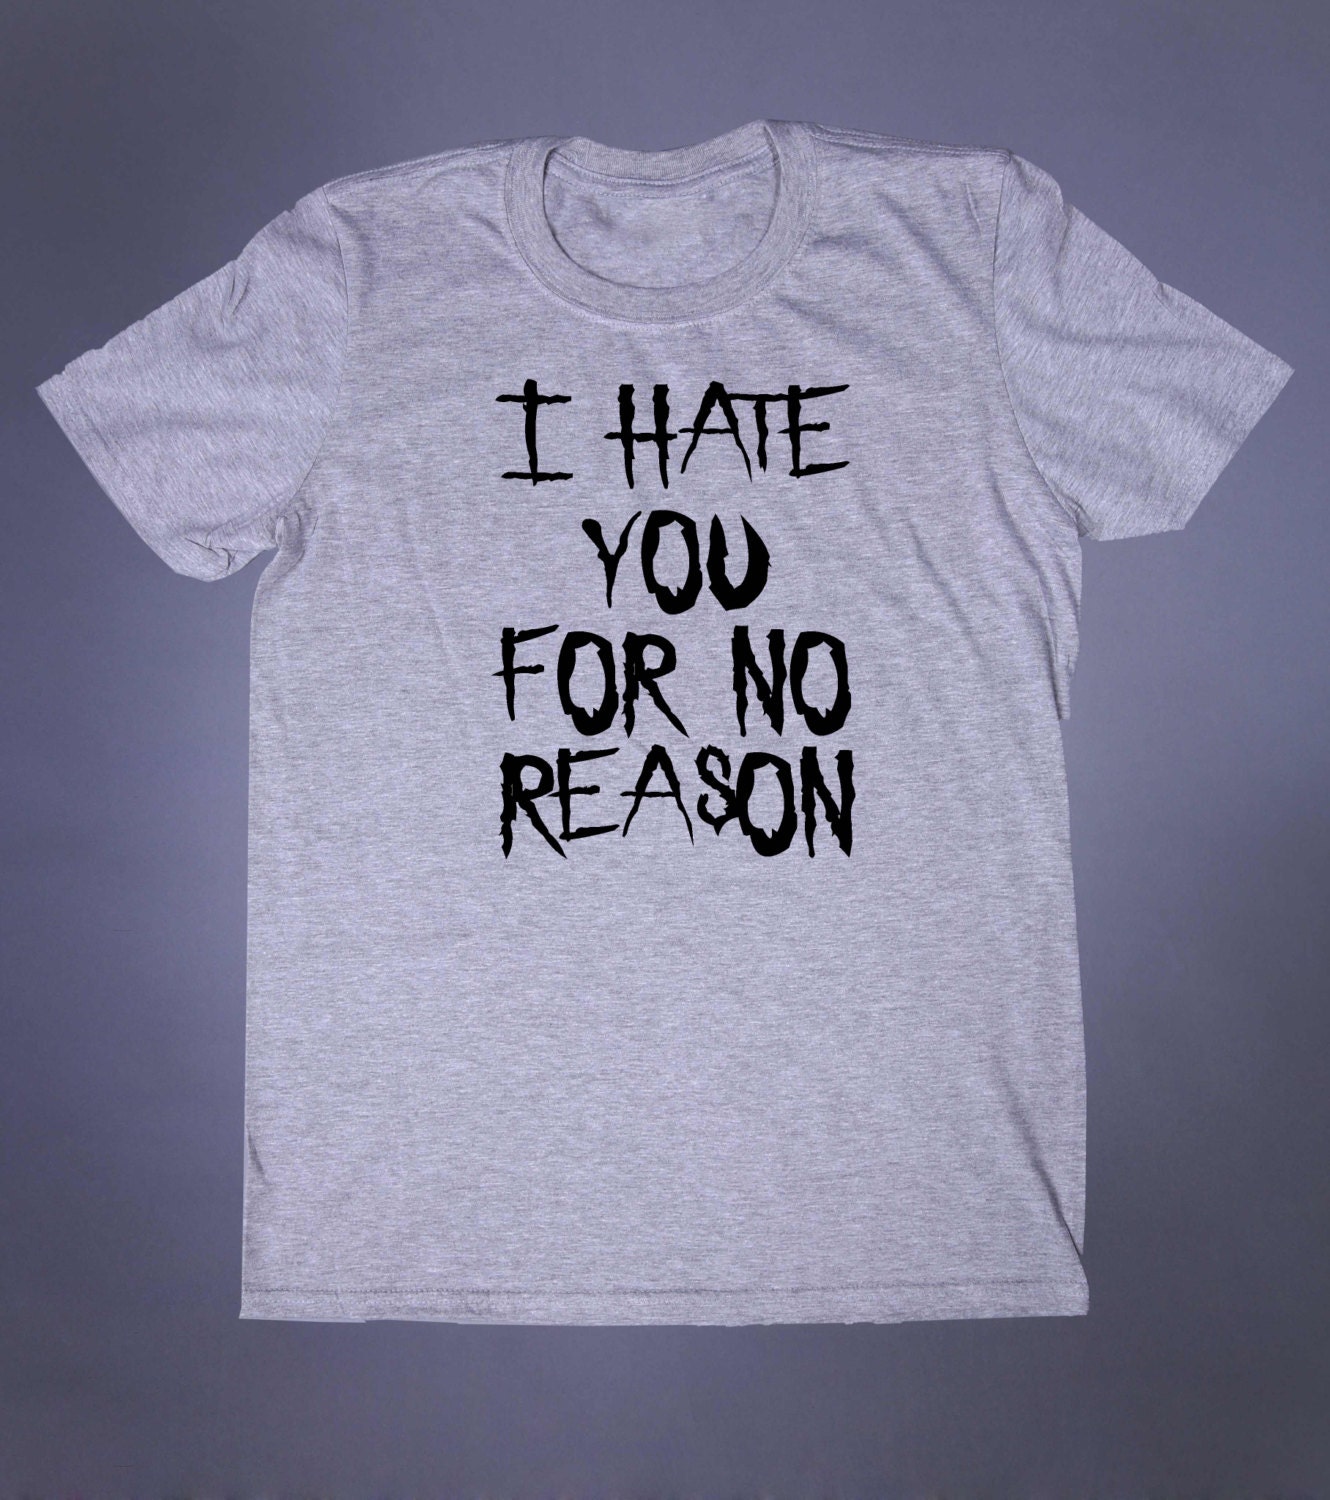 I Hate You For No Reason Slogan Tee Anti Social by GloomAndSound